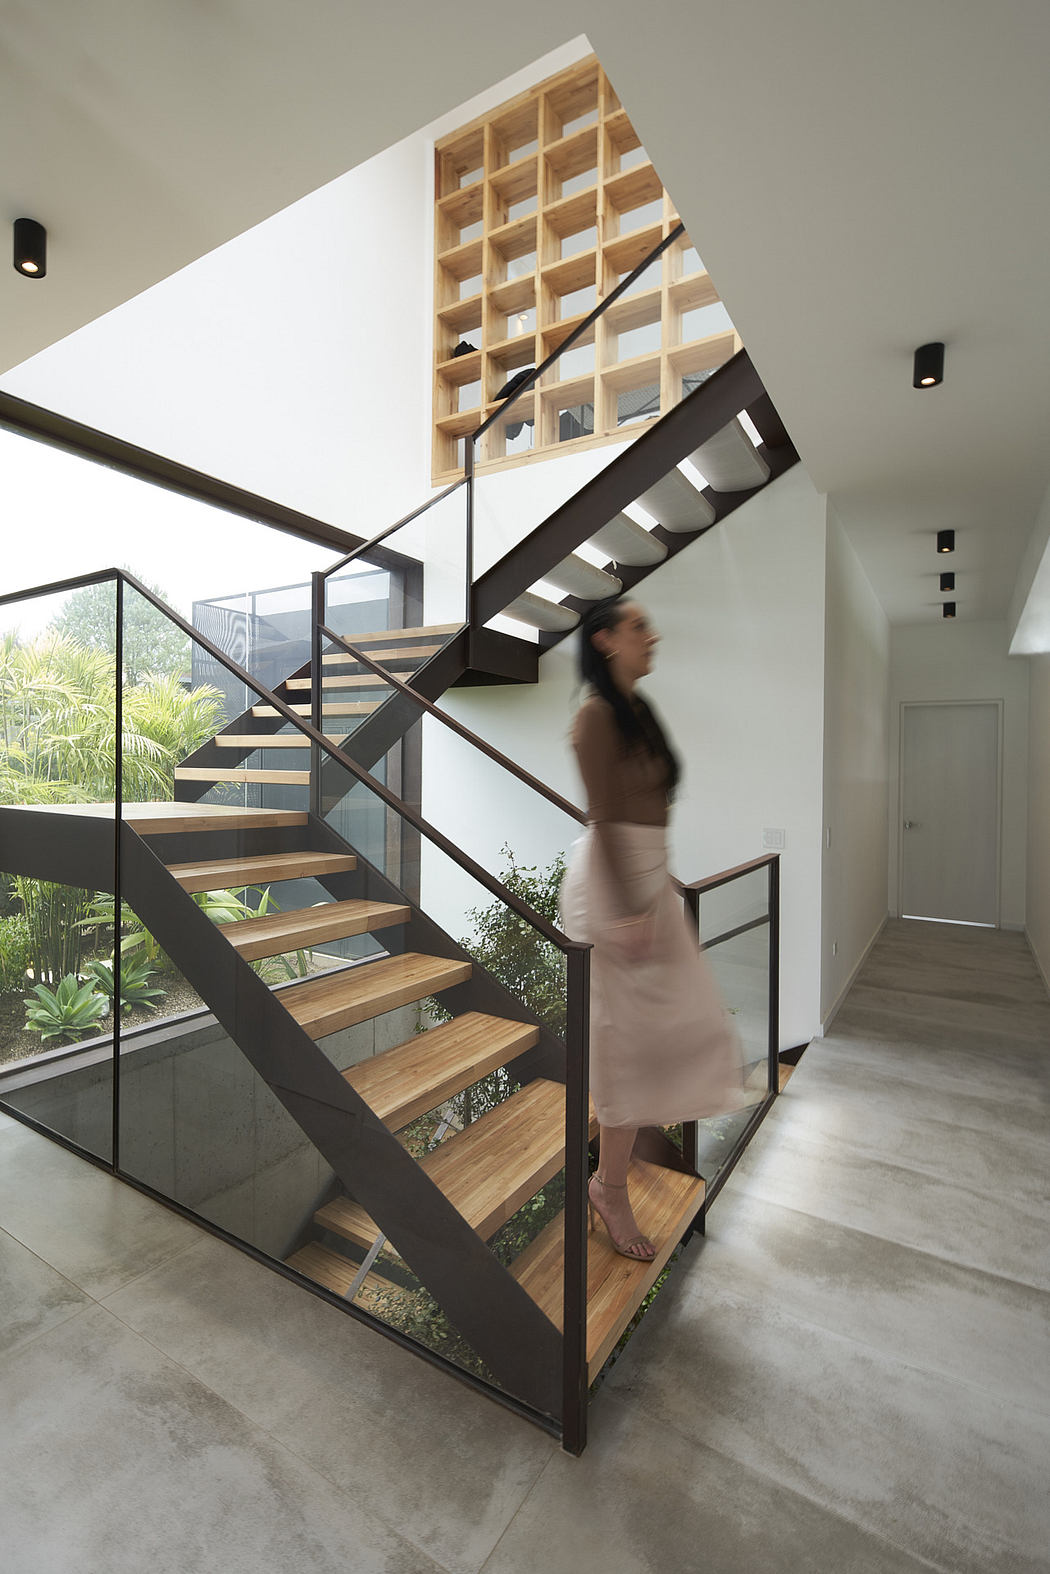 Modern staircase with wooden steps, metal railings, and a blurred person descending.